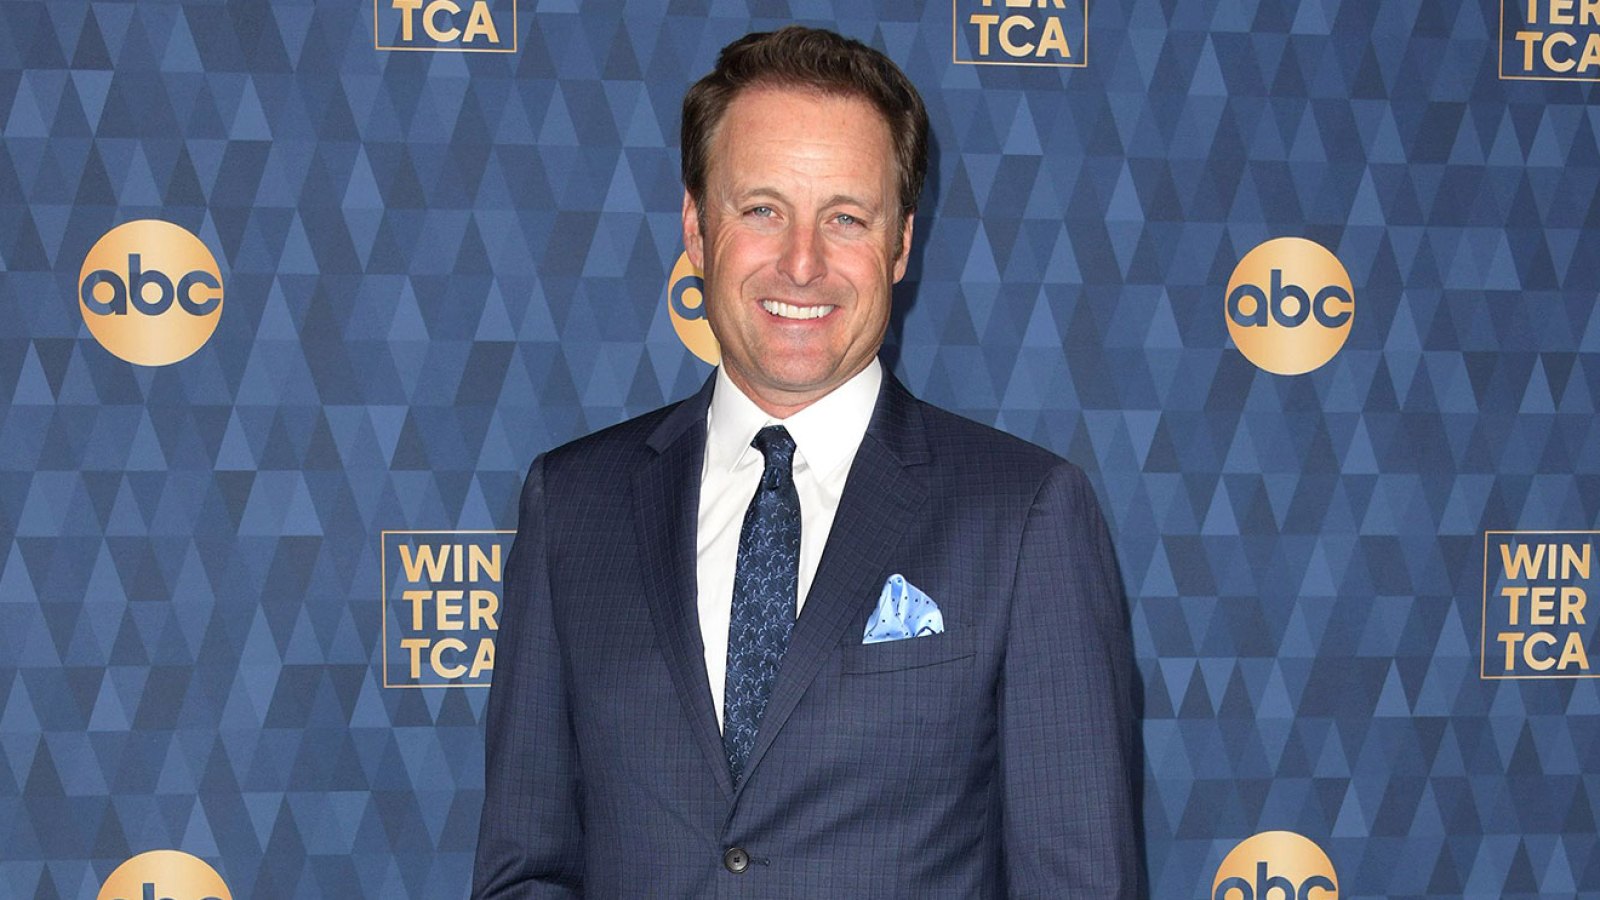 Chris Harrison Creates 'Bachelor'-Inspired Tropical Rose with Notes of Passion Fruit